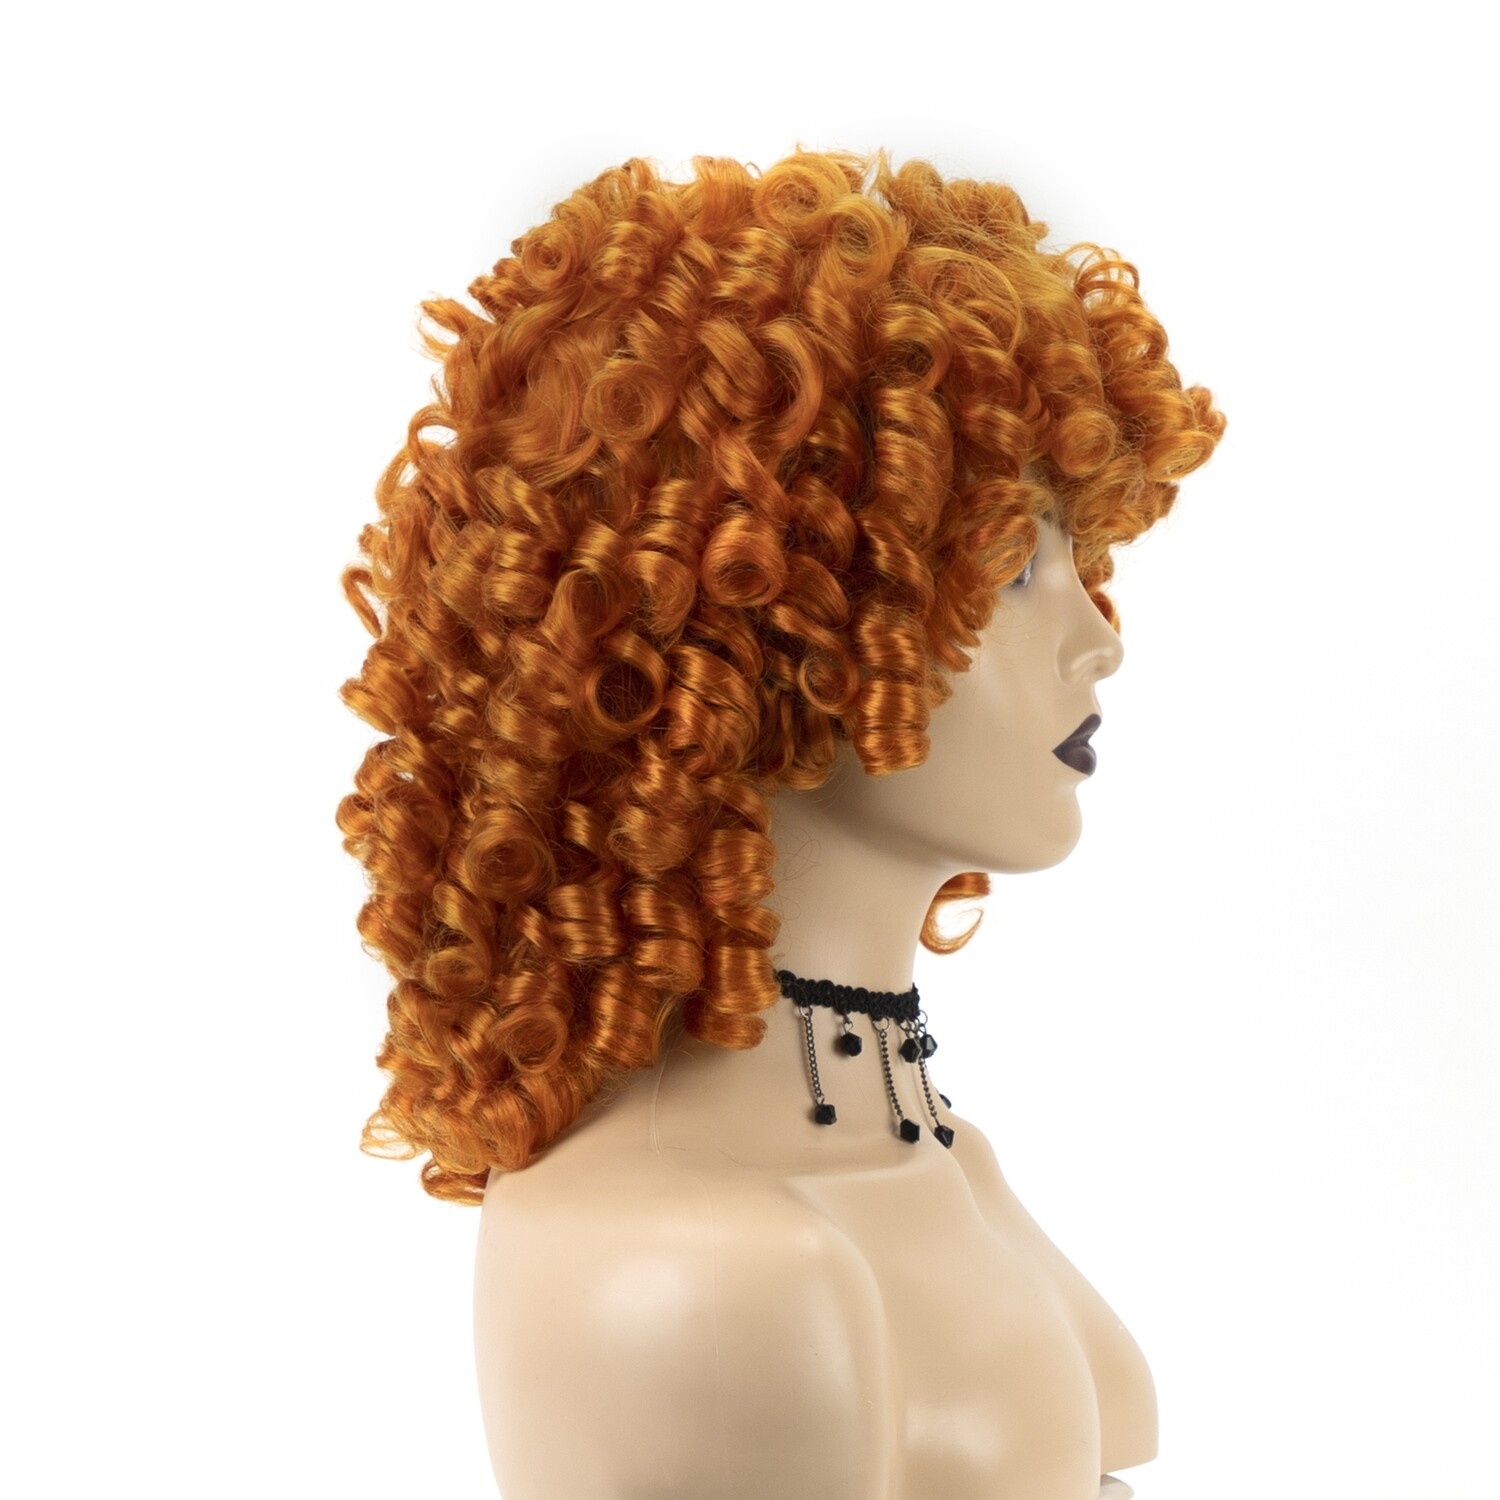 Short synthetic afro wig with a high quality elastic net in a vibrant orange or a deep red wine hue.